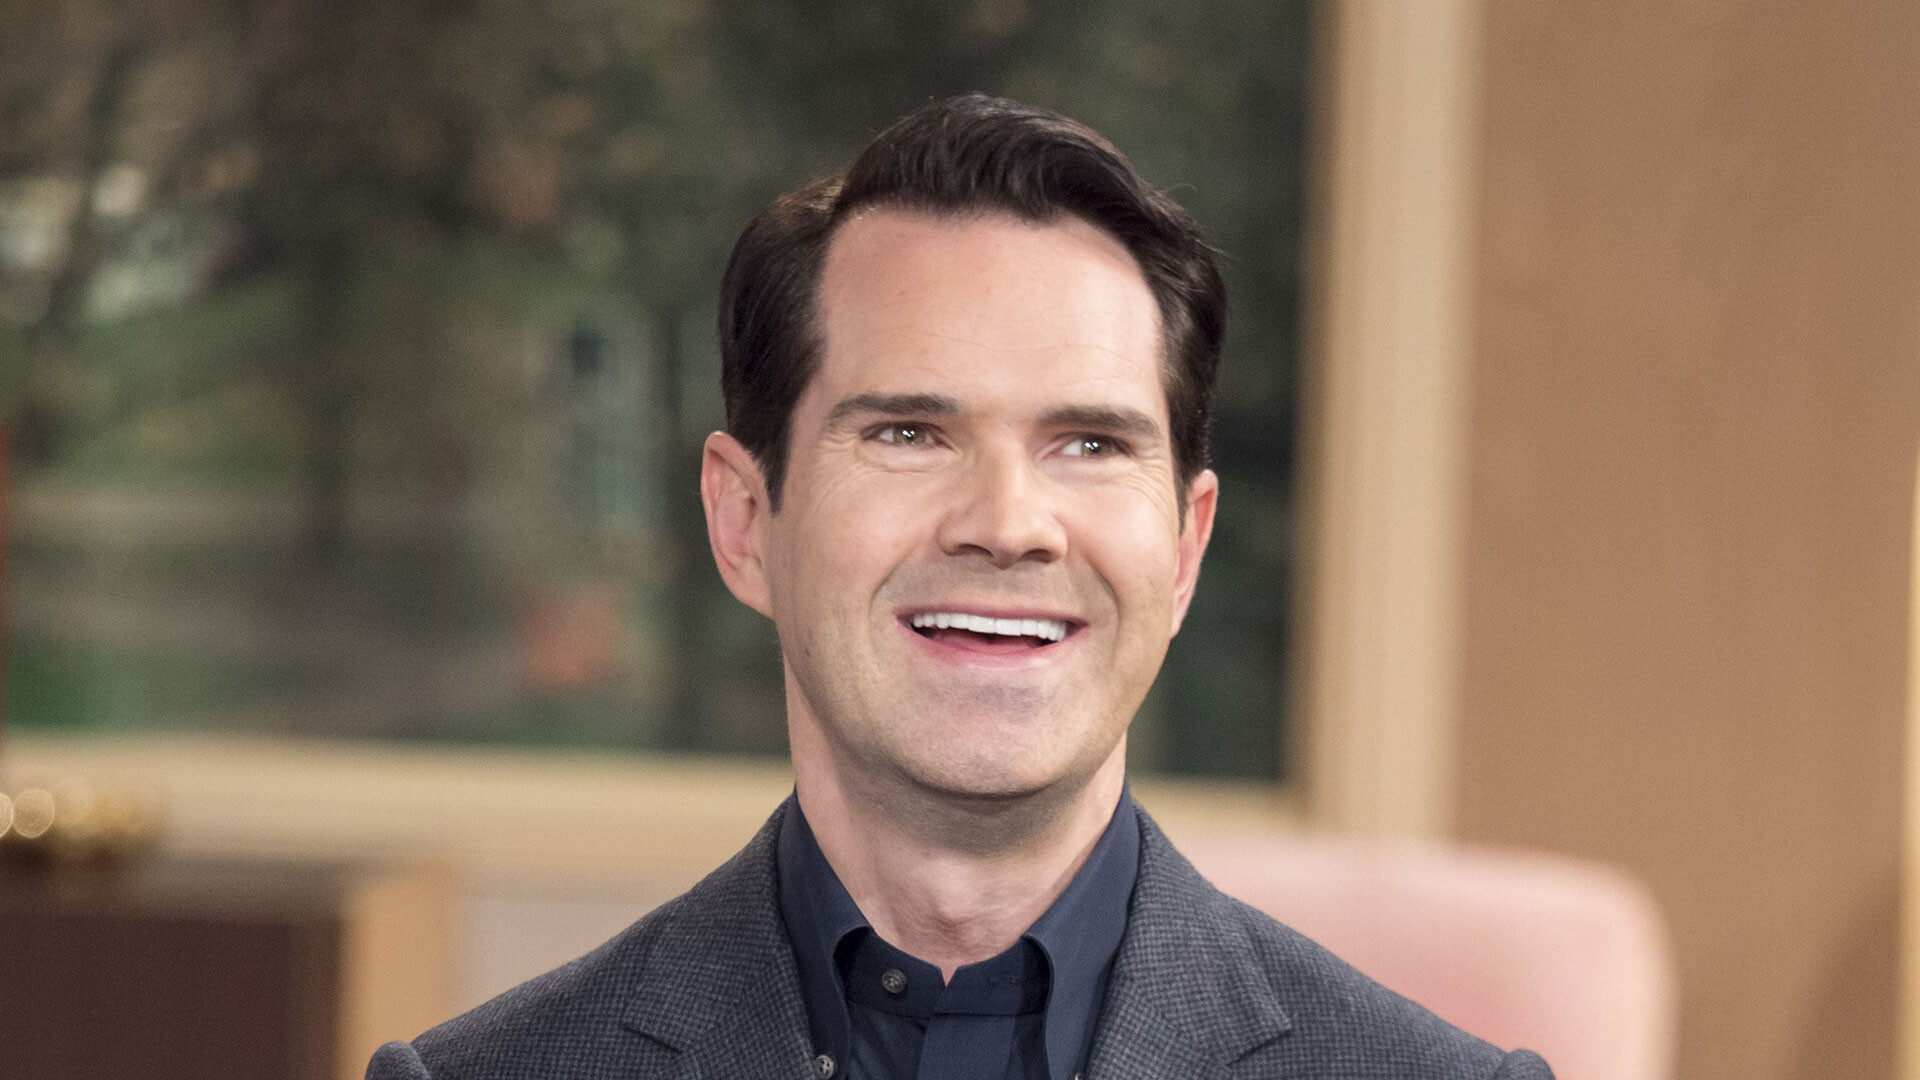 Jimmy Carr: The English comedian known for his boundary-pushing stand-up comedy, A television show presenter. 1920x1080 Full HD Background.